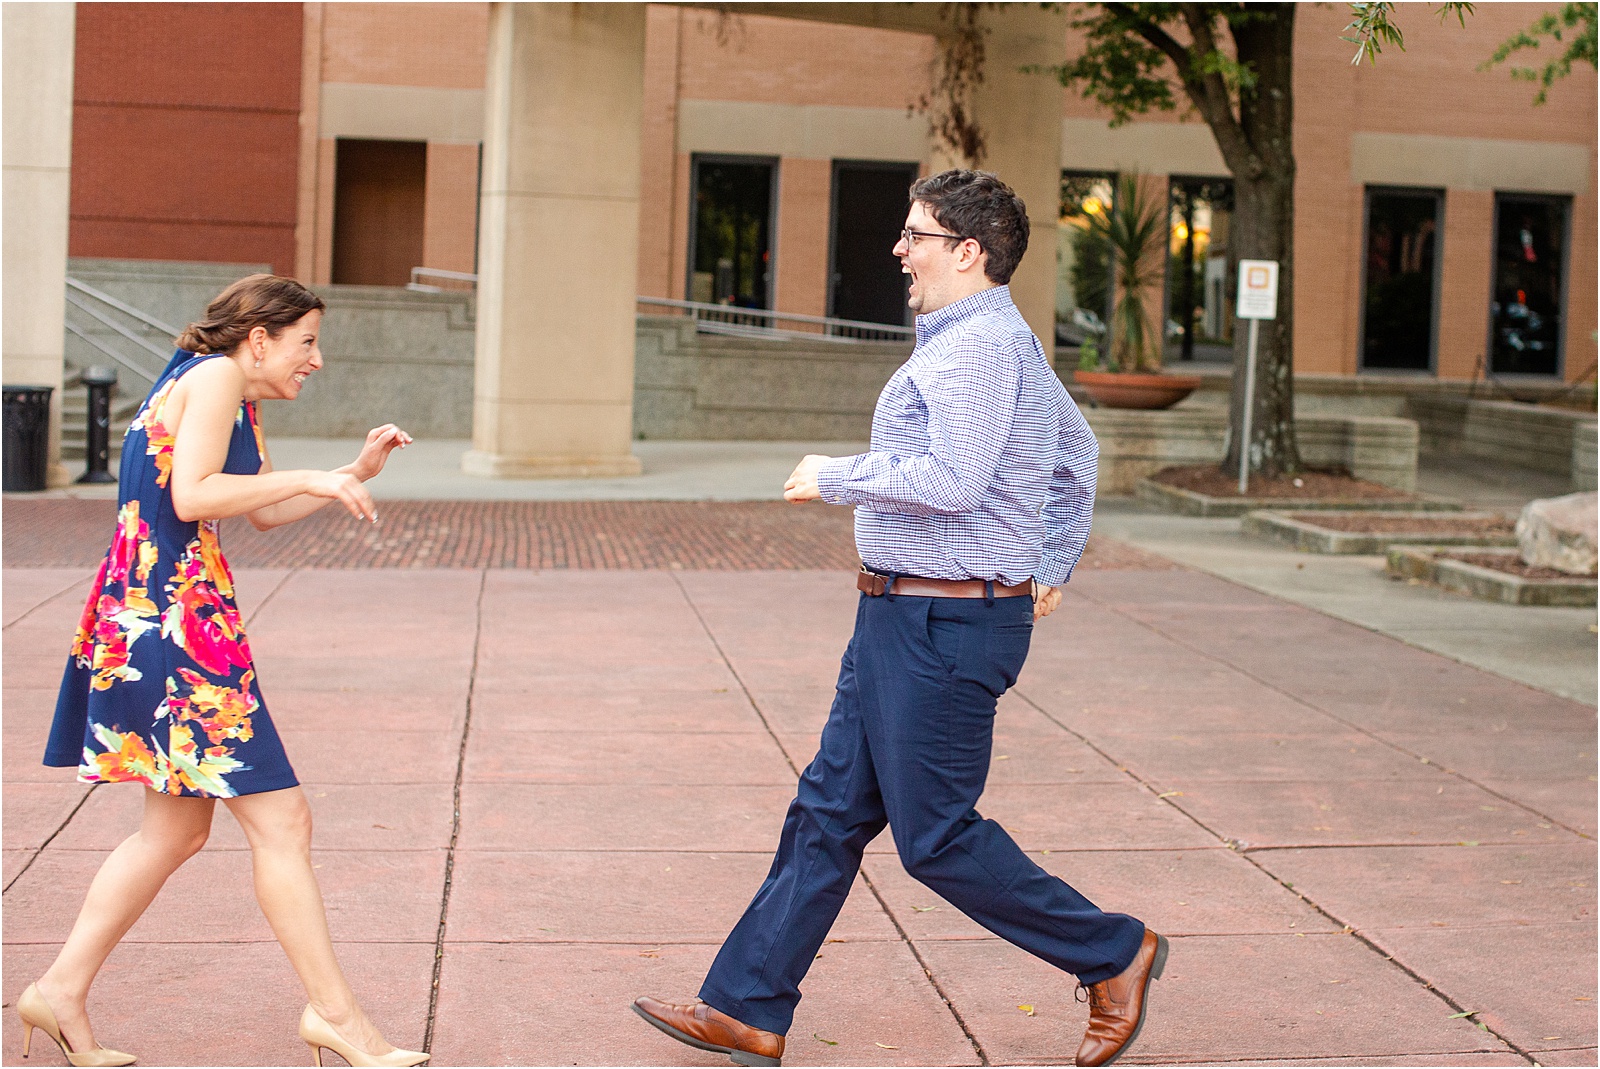 Woman laughing as guy runs towards her for engagement pictures